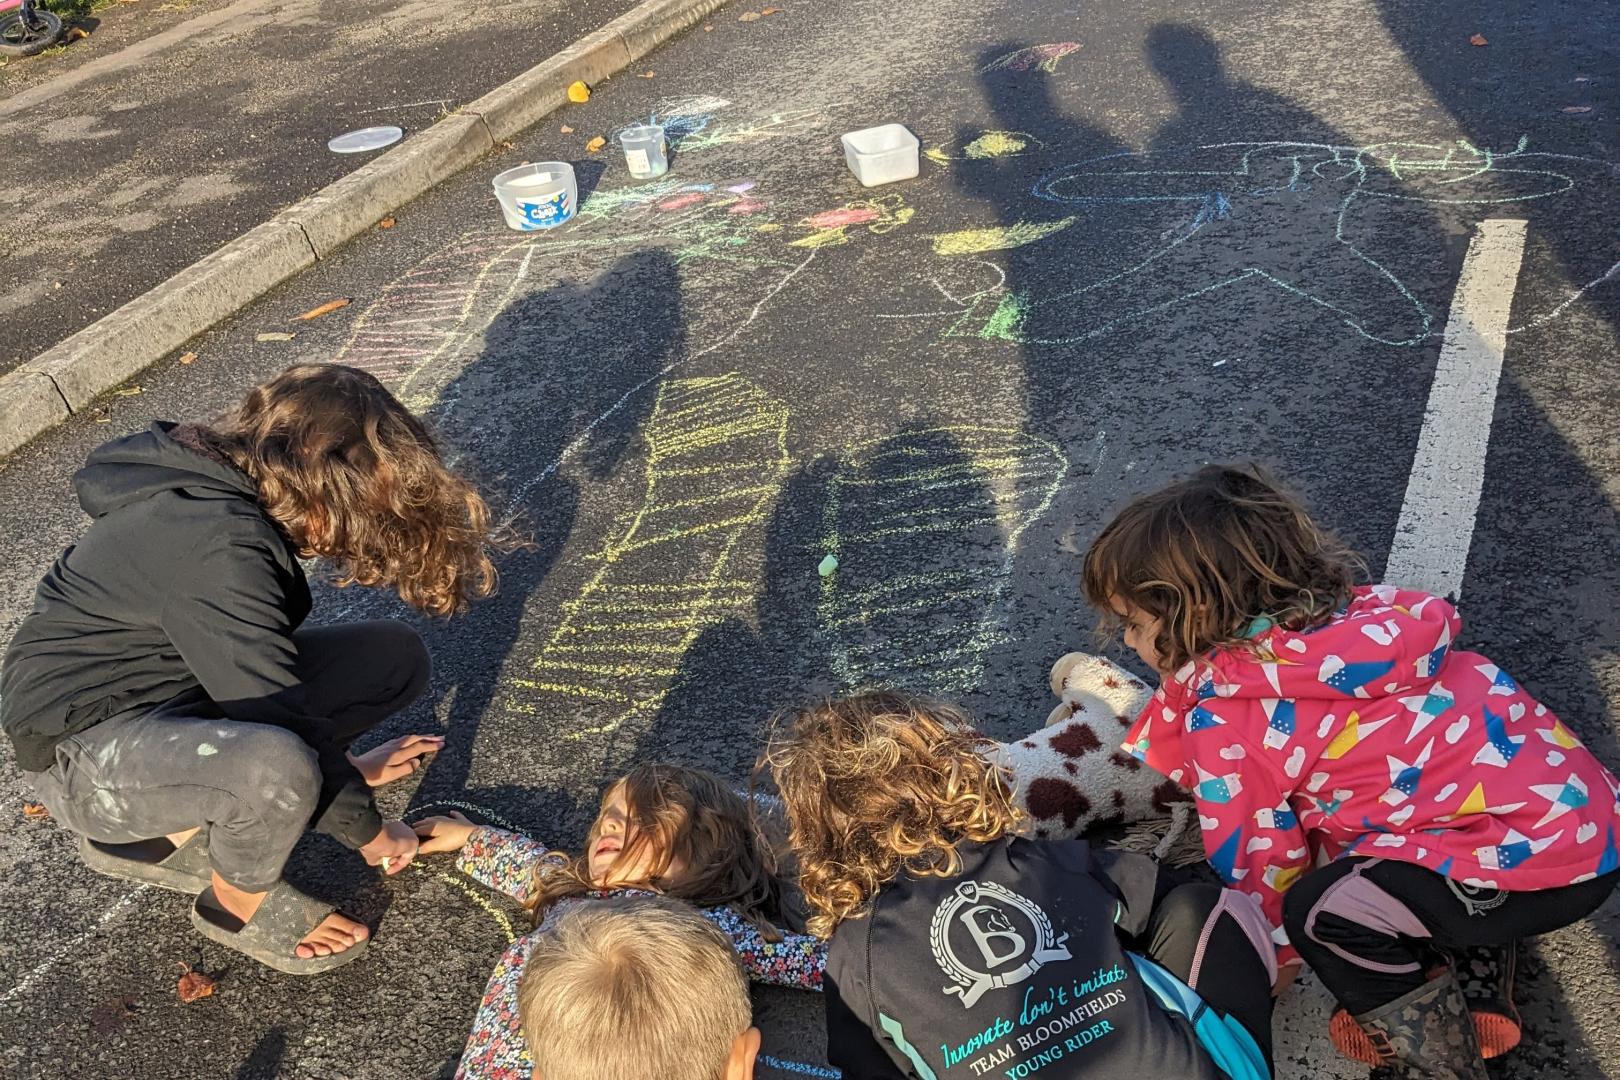 Five children playing together and drawing with chalk on a road